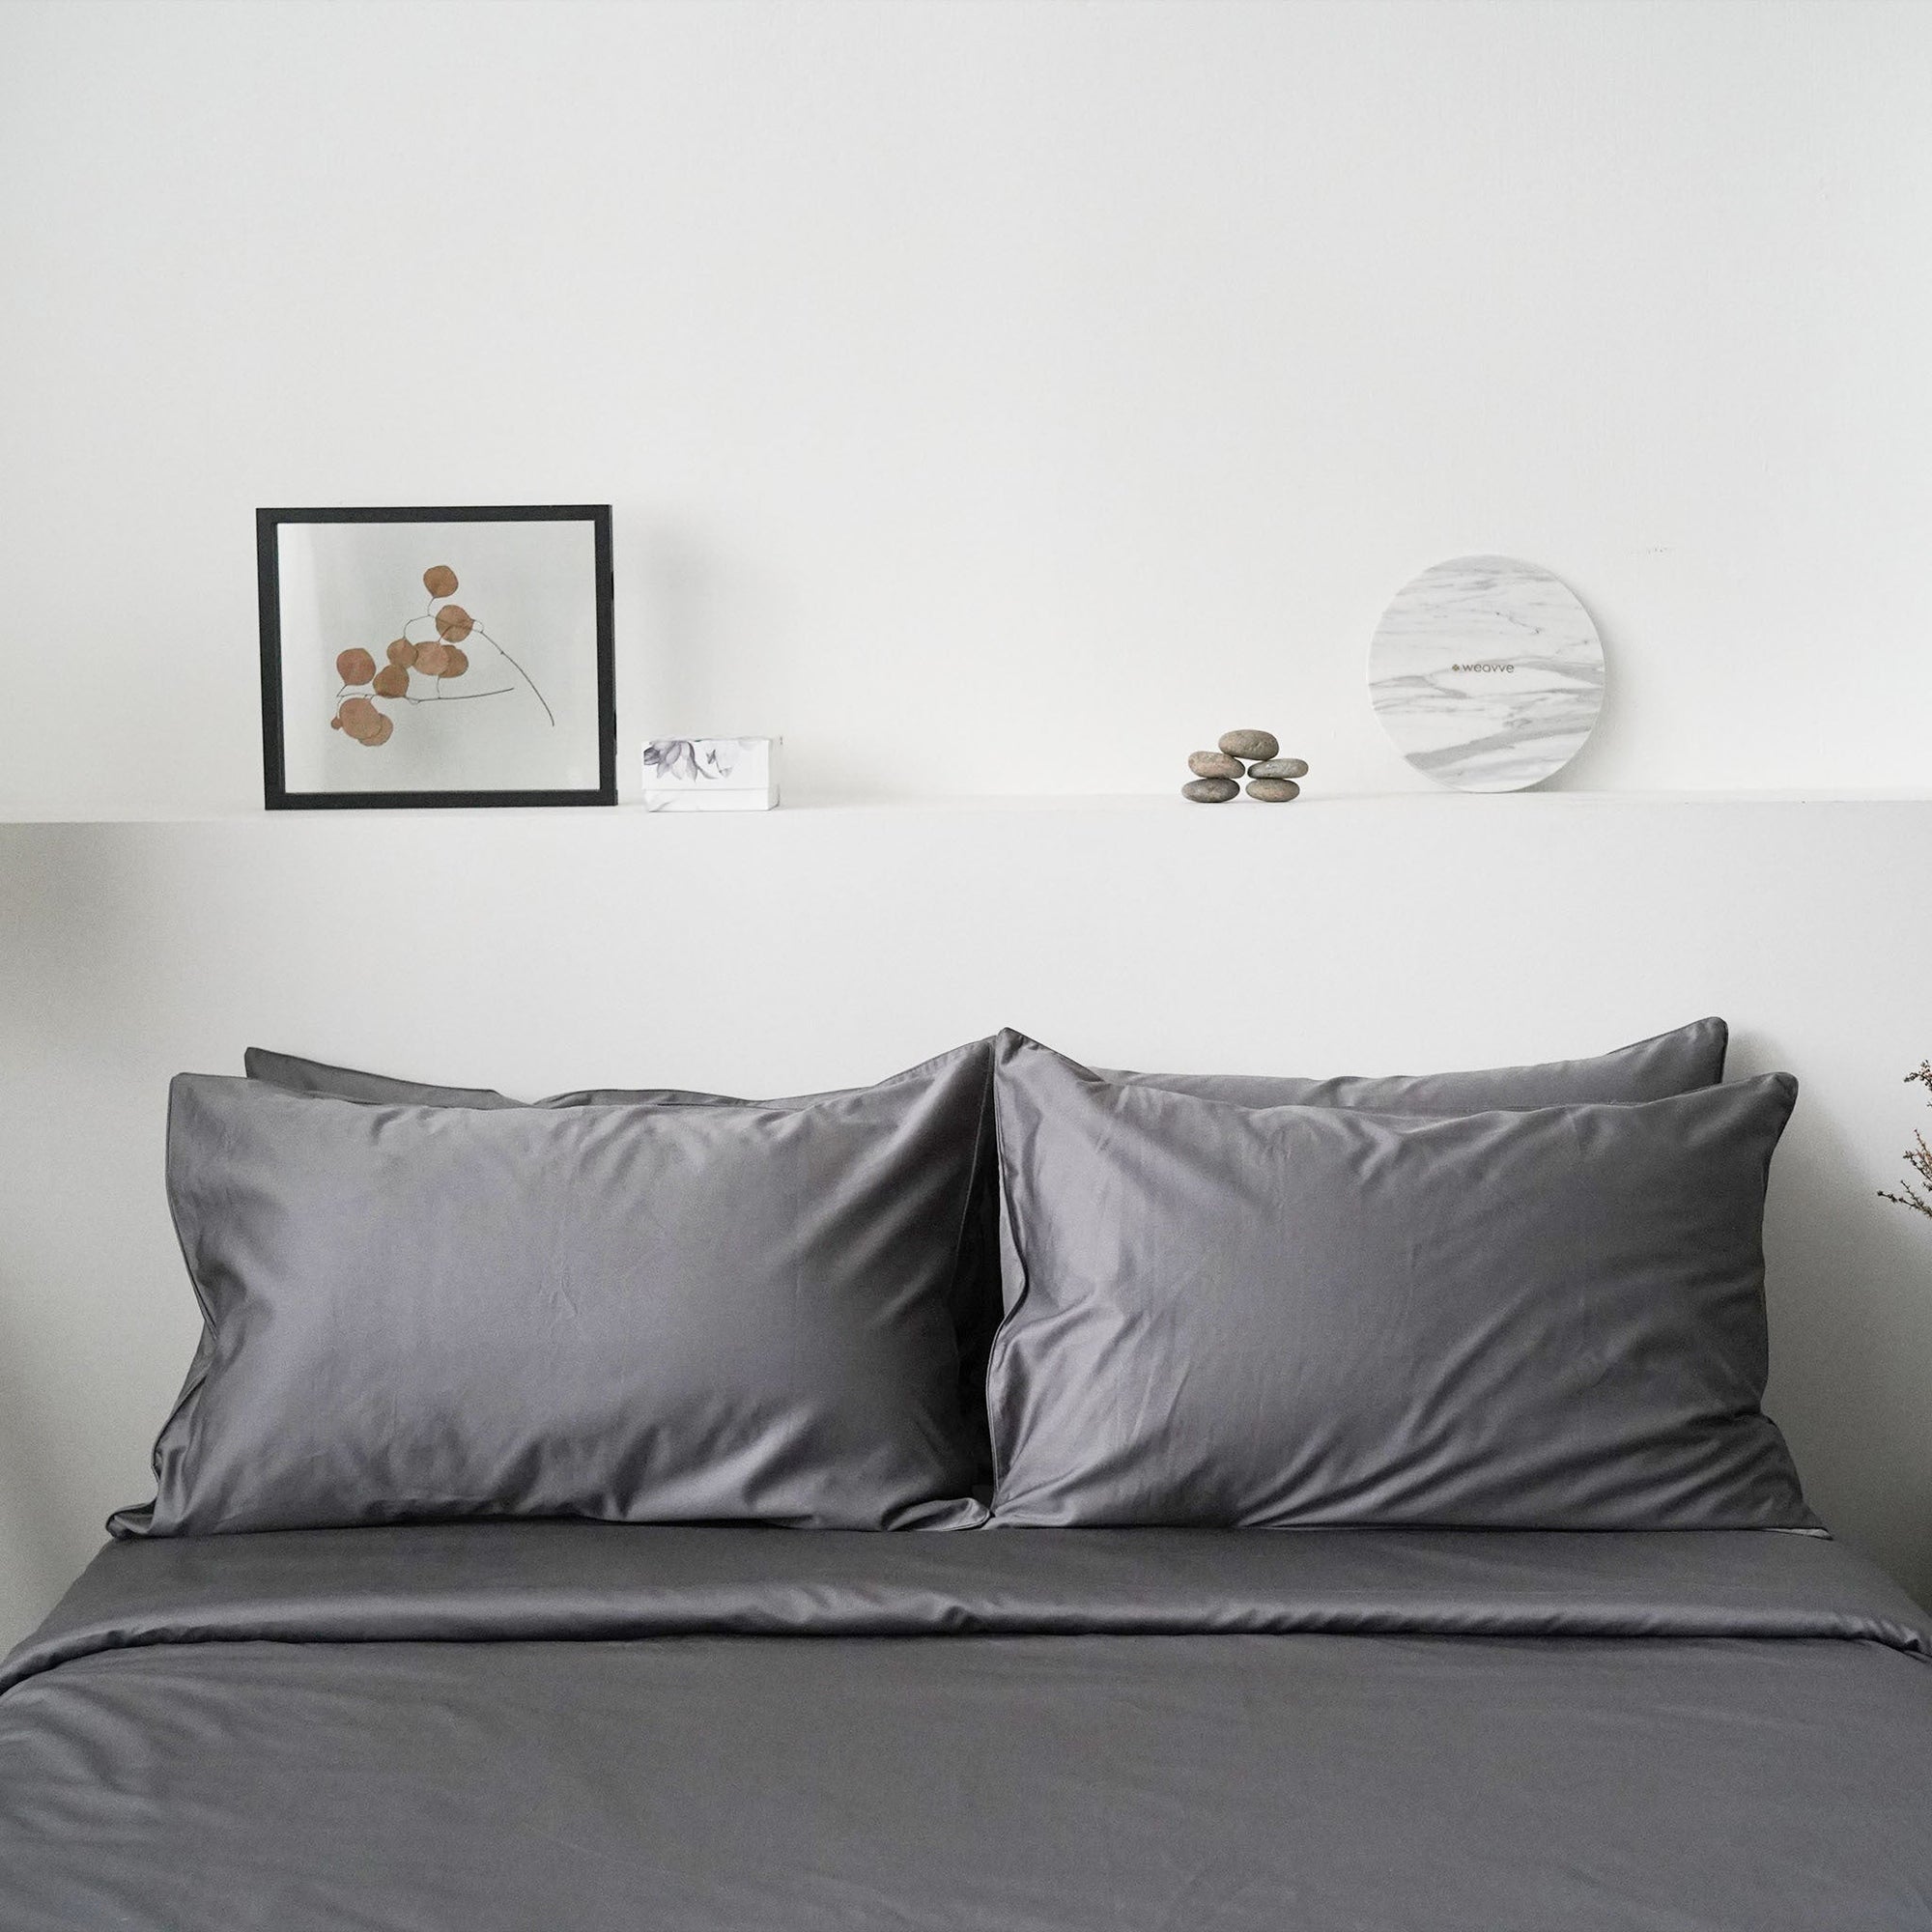 Persian Grey Cotton Bed Sheets Classic Set with Cotton Fitted Sheet, Cotton Pillow Case, Cotton Duvet Cover. Buy Persian Grey Bed Sheets at Weavve Home, Shop Egyptian Cotton Bed Sheets Singapore and Luxury Hotel Sheets. 600 High Thread Count Bed Sheet. 